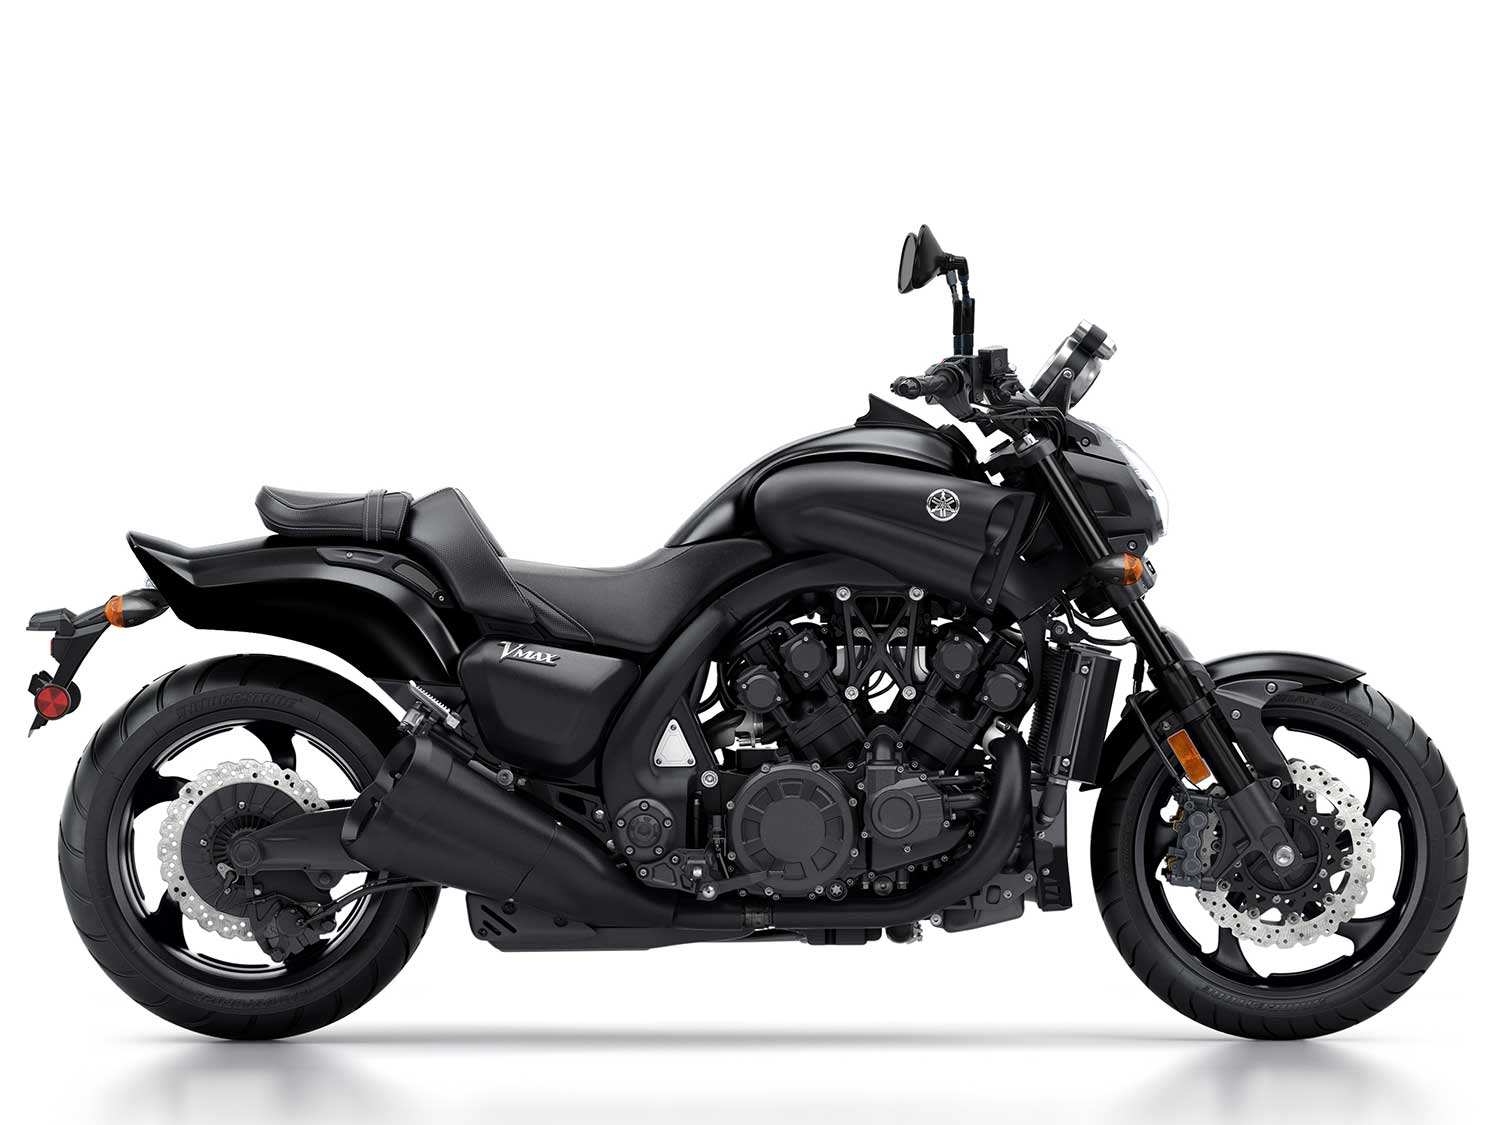 2020 Yamaha VMAX Buyer's Guide: Specs, Photos, Price | Cycle World